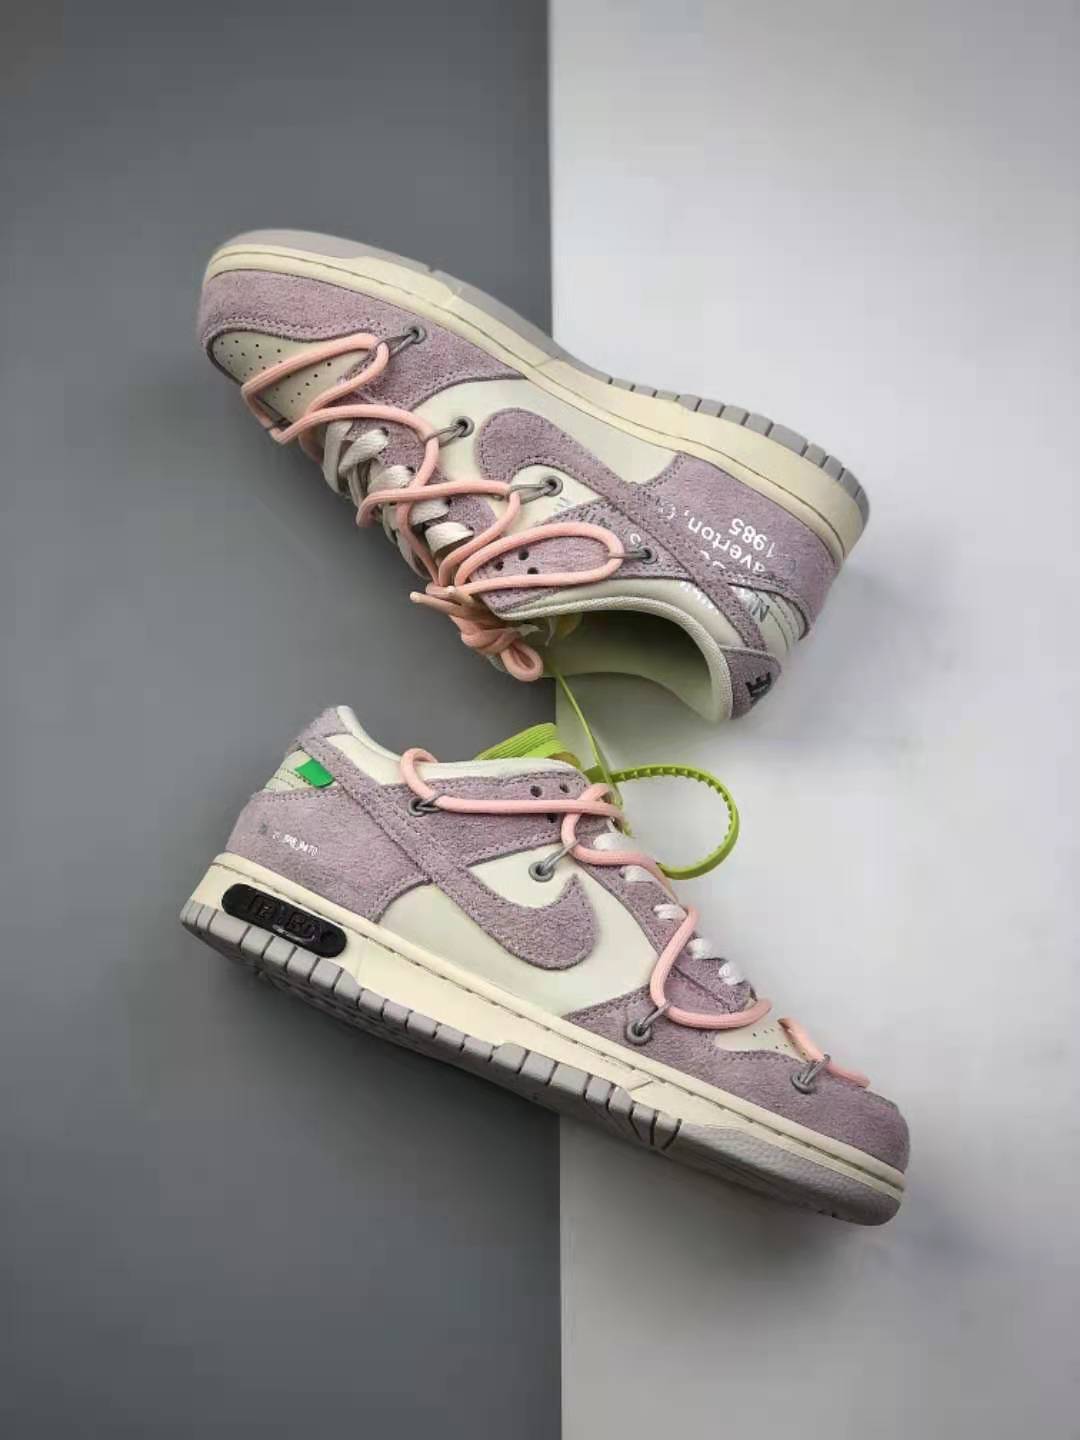 Nike Off-White x Dunk Low 'Lot 12 of 50' DJ0950-100 - Limited Edition Collaboration Sneakers